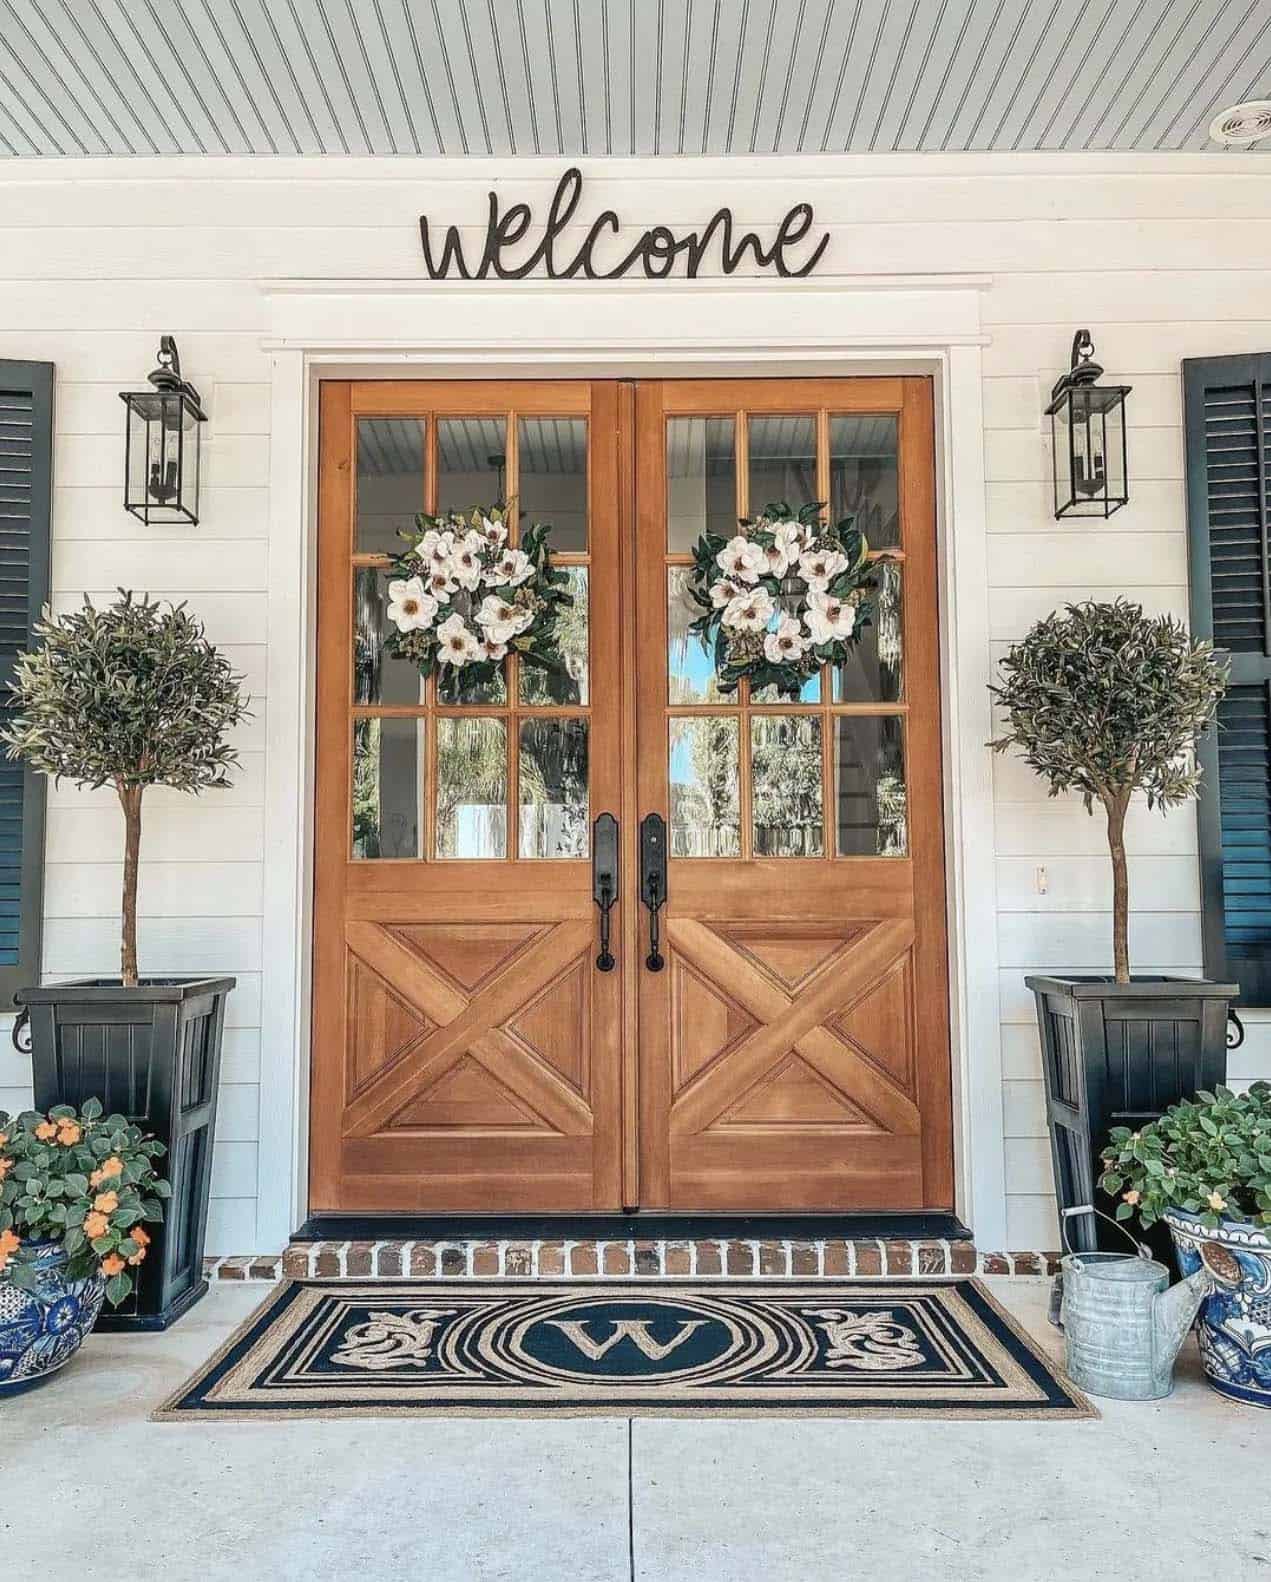 Inviting spring porch with olive topiaries and magnolia wreaths